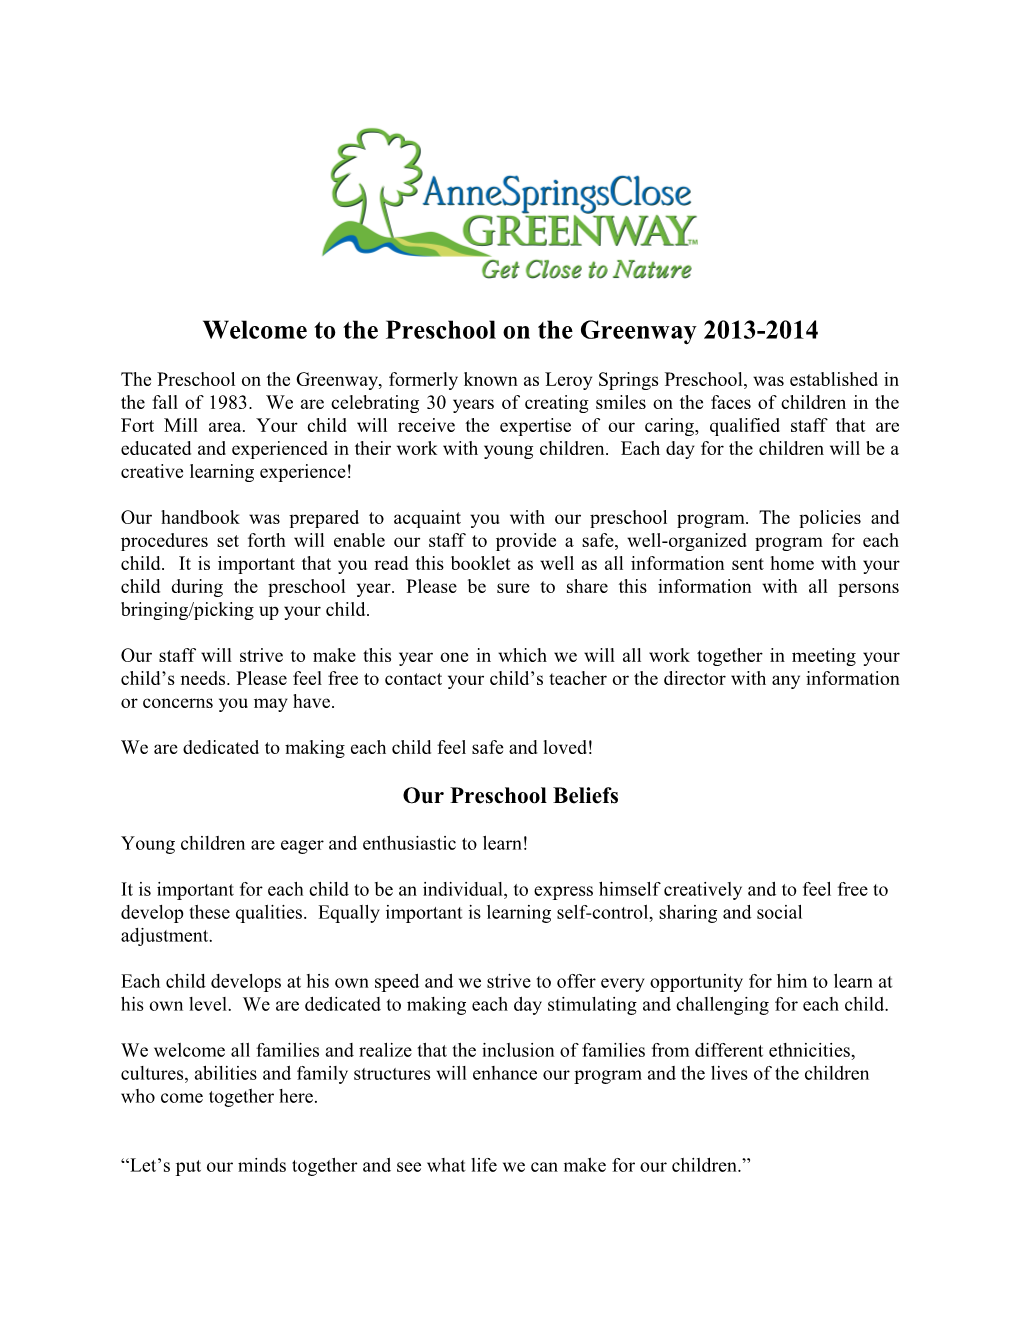 Welcome to the Preschool on the Greenway 2013-2014